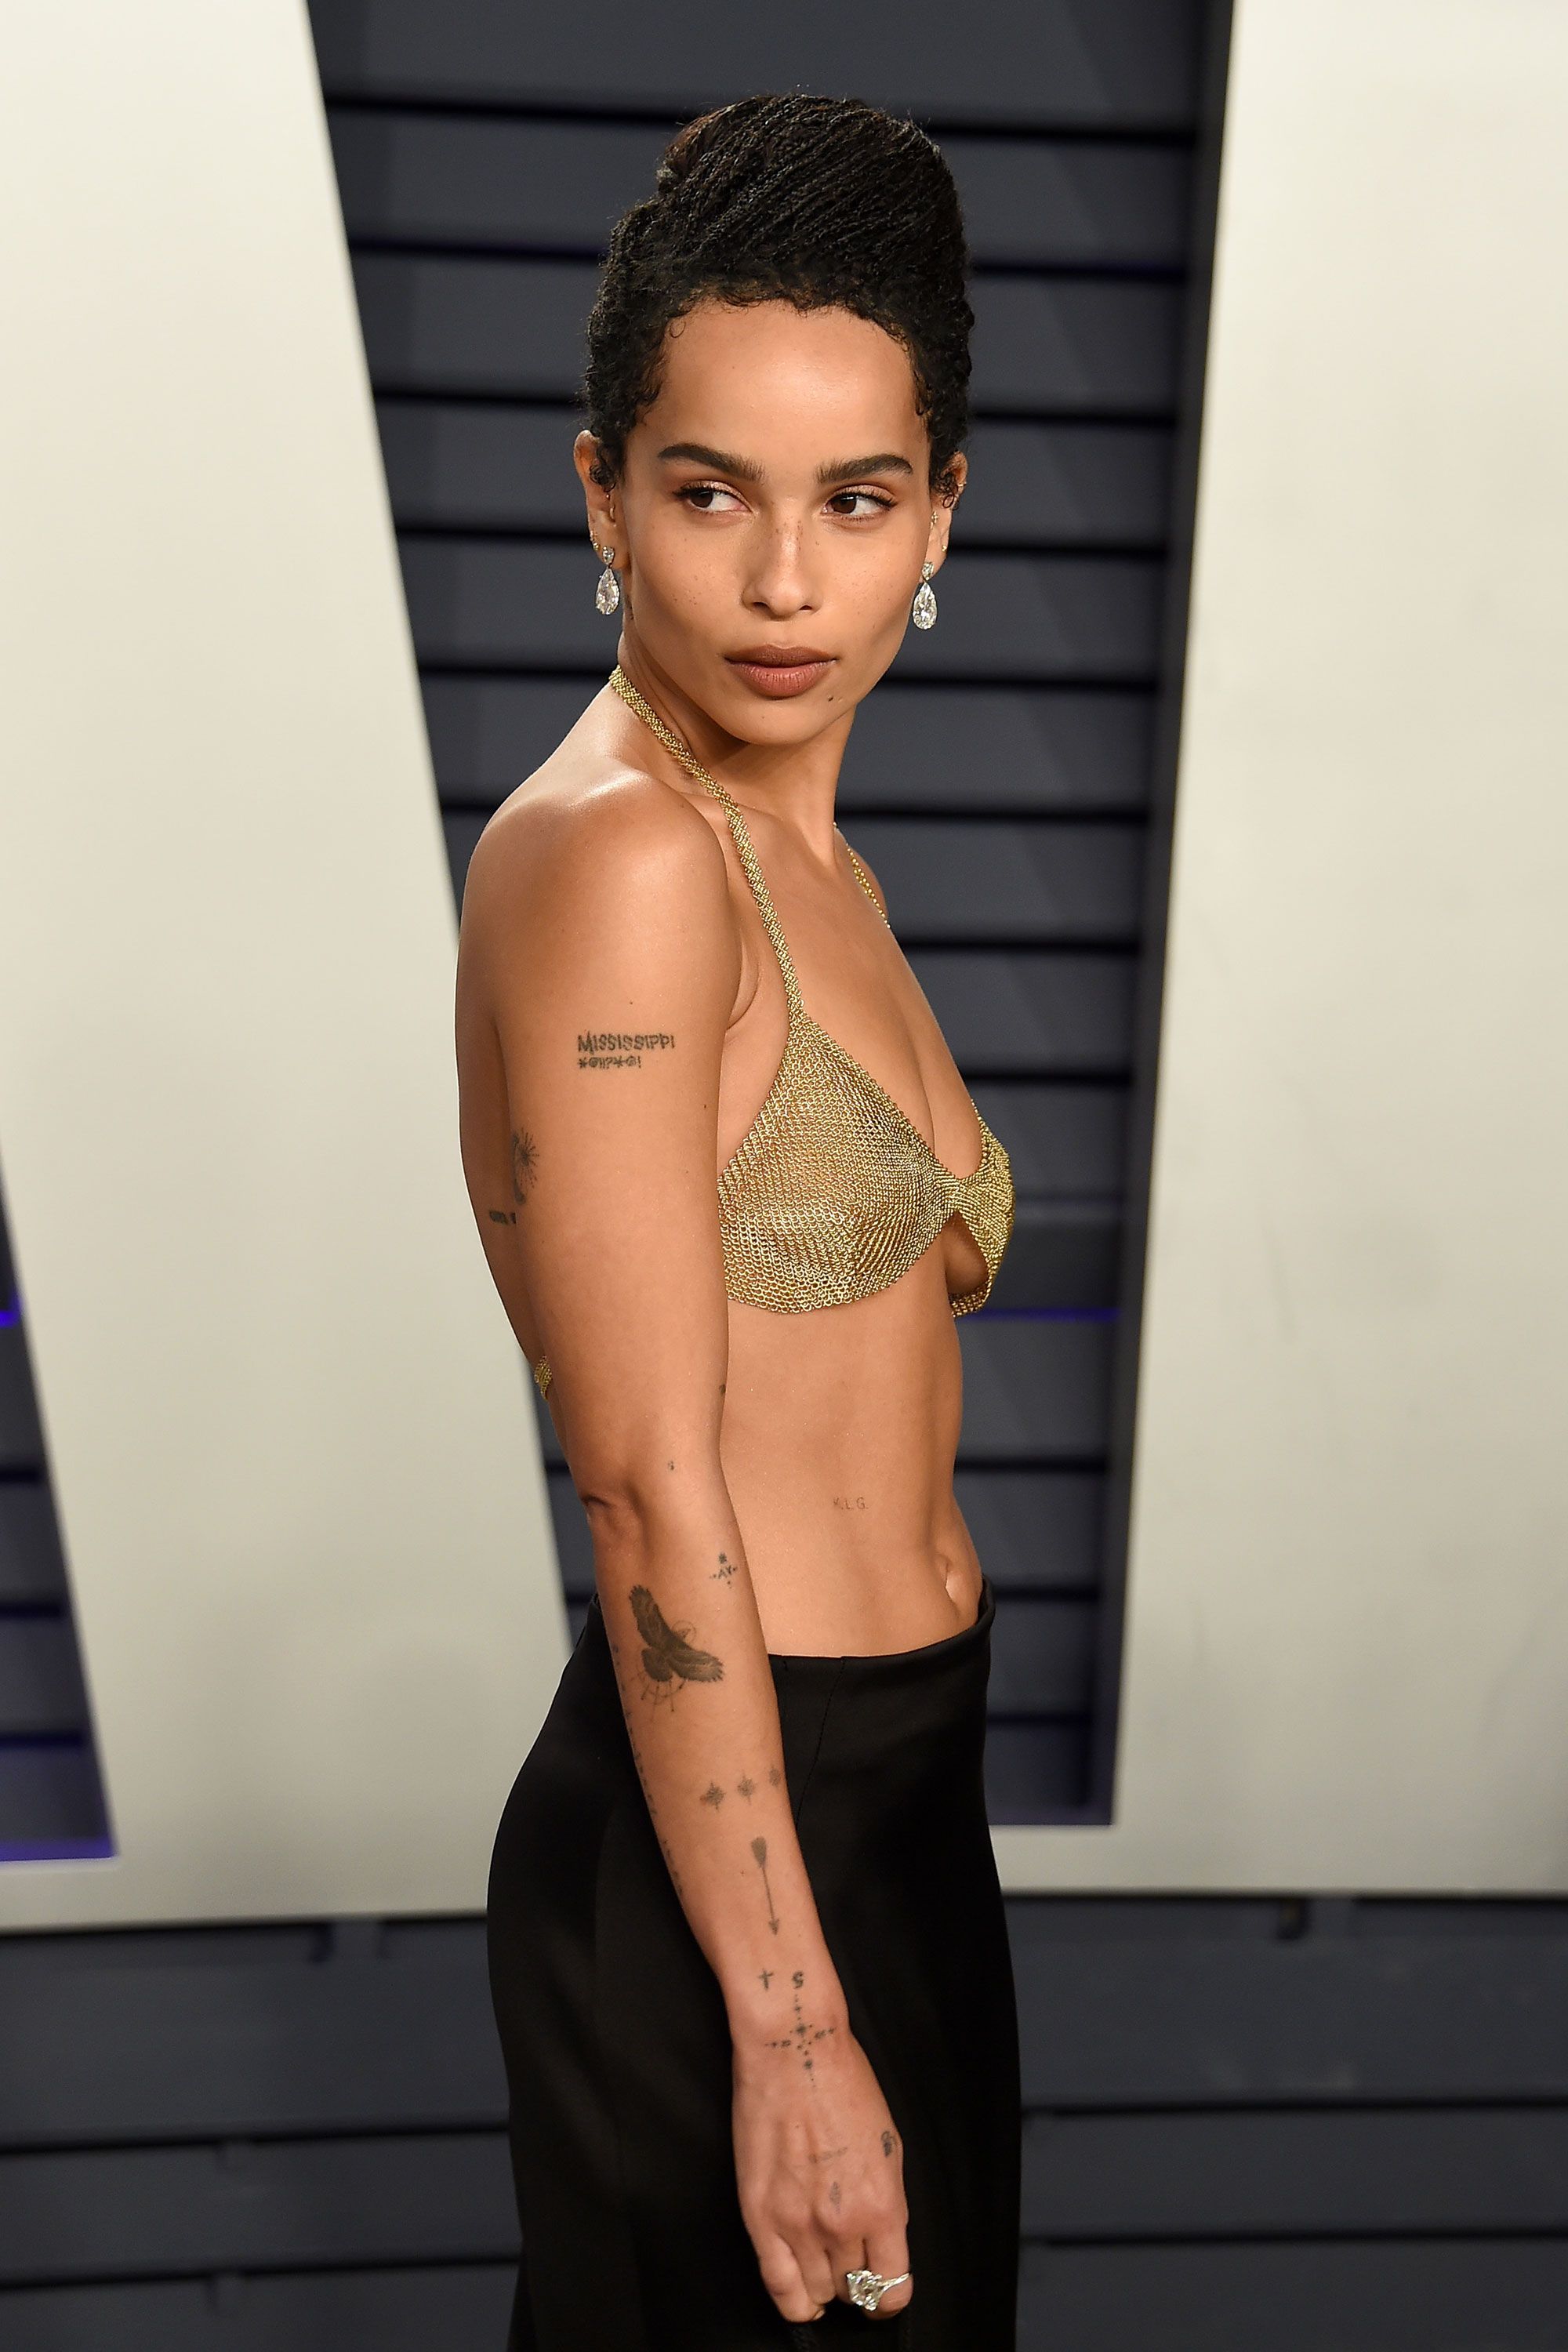 Zoe Kravitz wore an 18k-gold mesh bra by Tiffany & Co to the